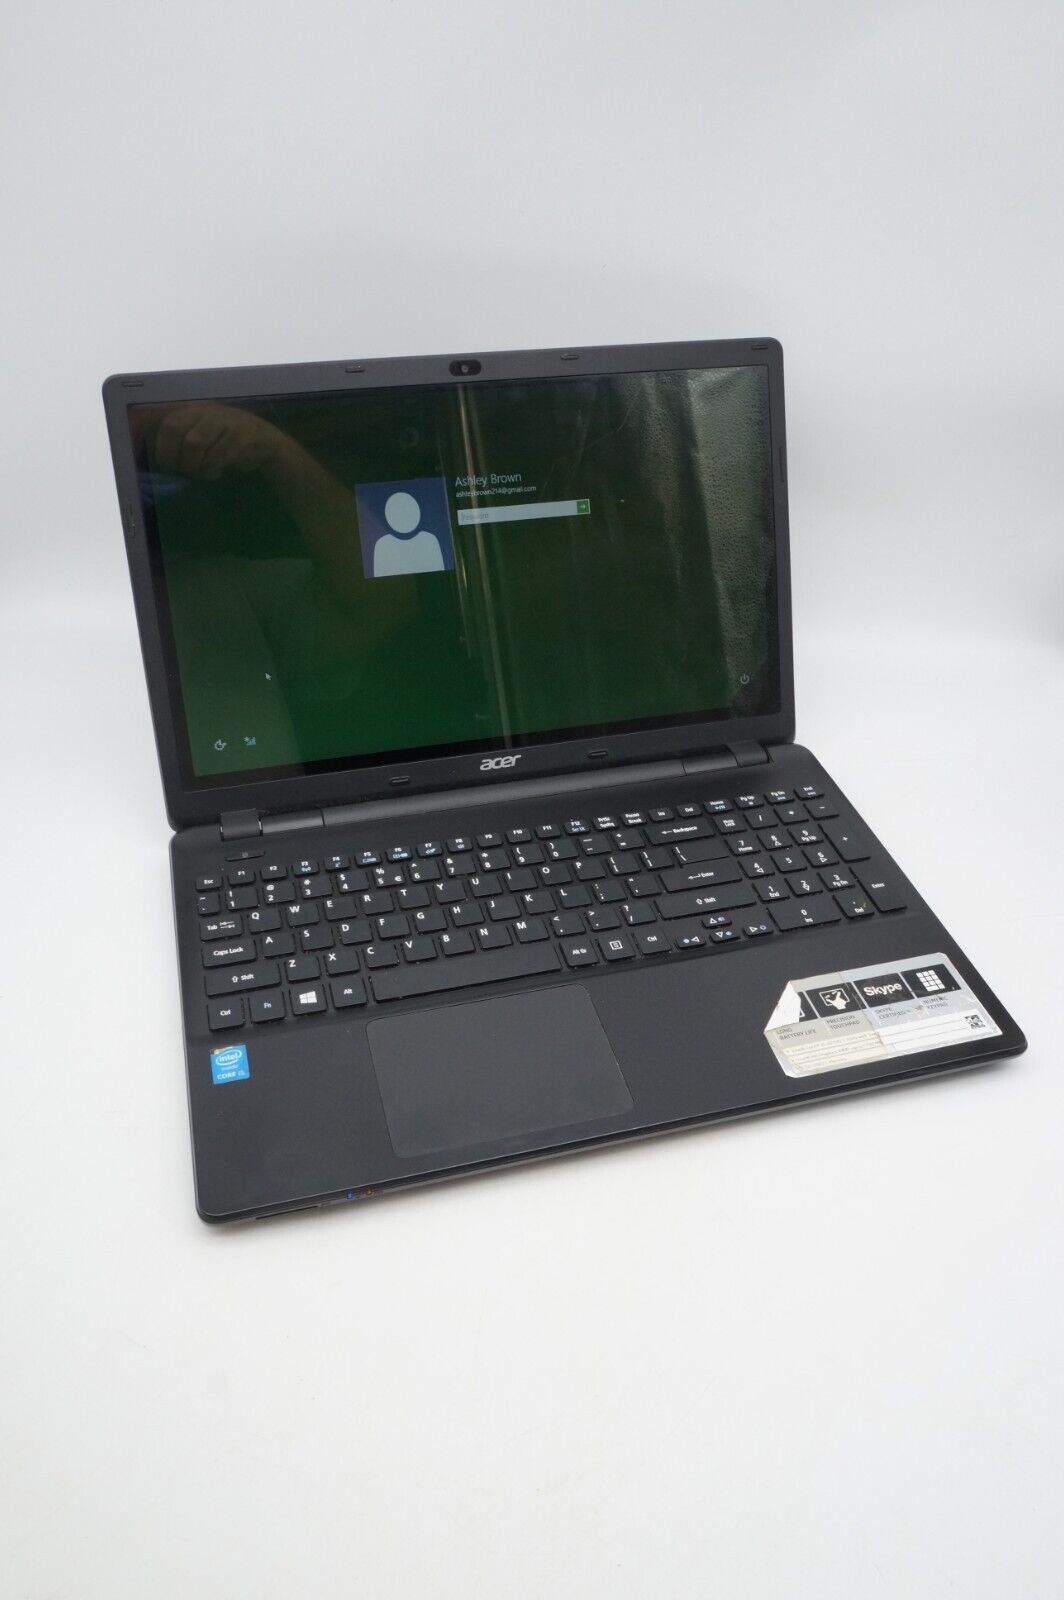 ACER ASPIRE E15 TOUCH Laptop Core i5-4210U @1.70 GHZ 4GB RAM 500 GB HD AS IS